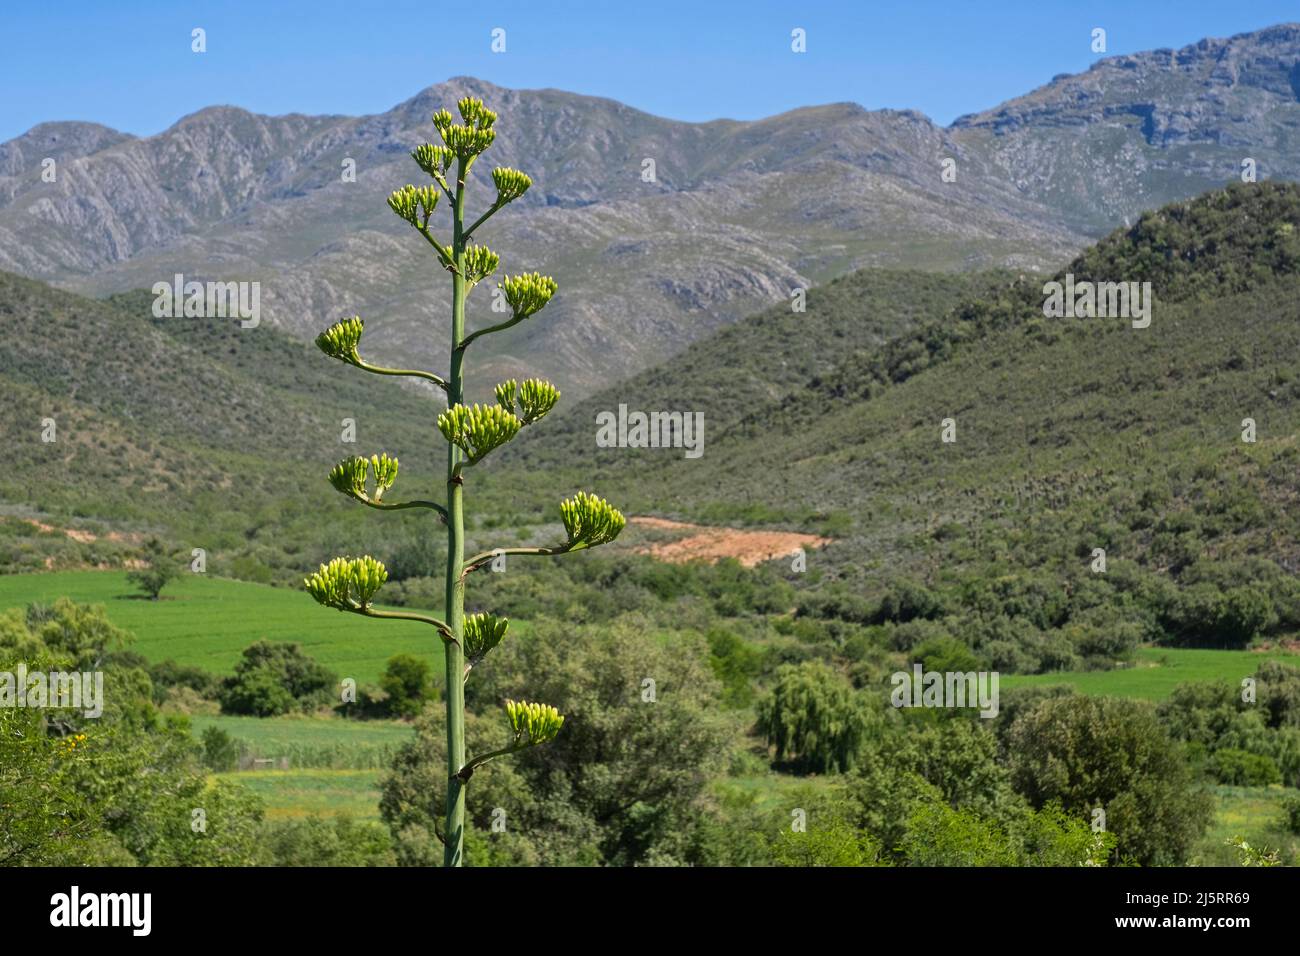 Century plant (Agave americana), invasive succulent at the Swartberg Pass running over Swartberg mountain range, Western Cape Province, South Africa Stock Photo